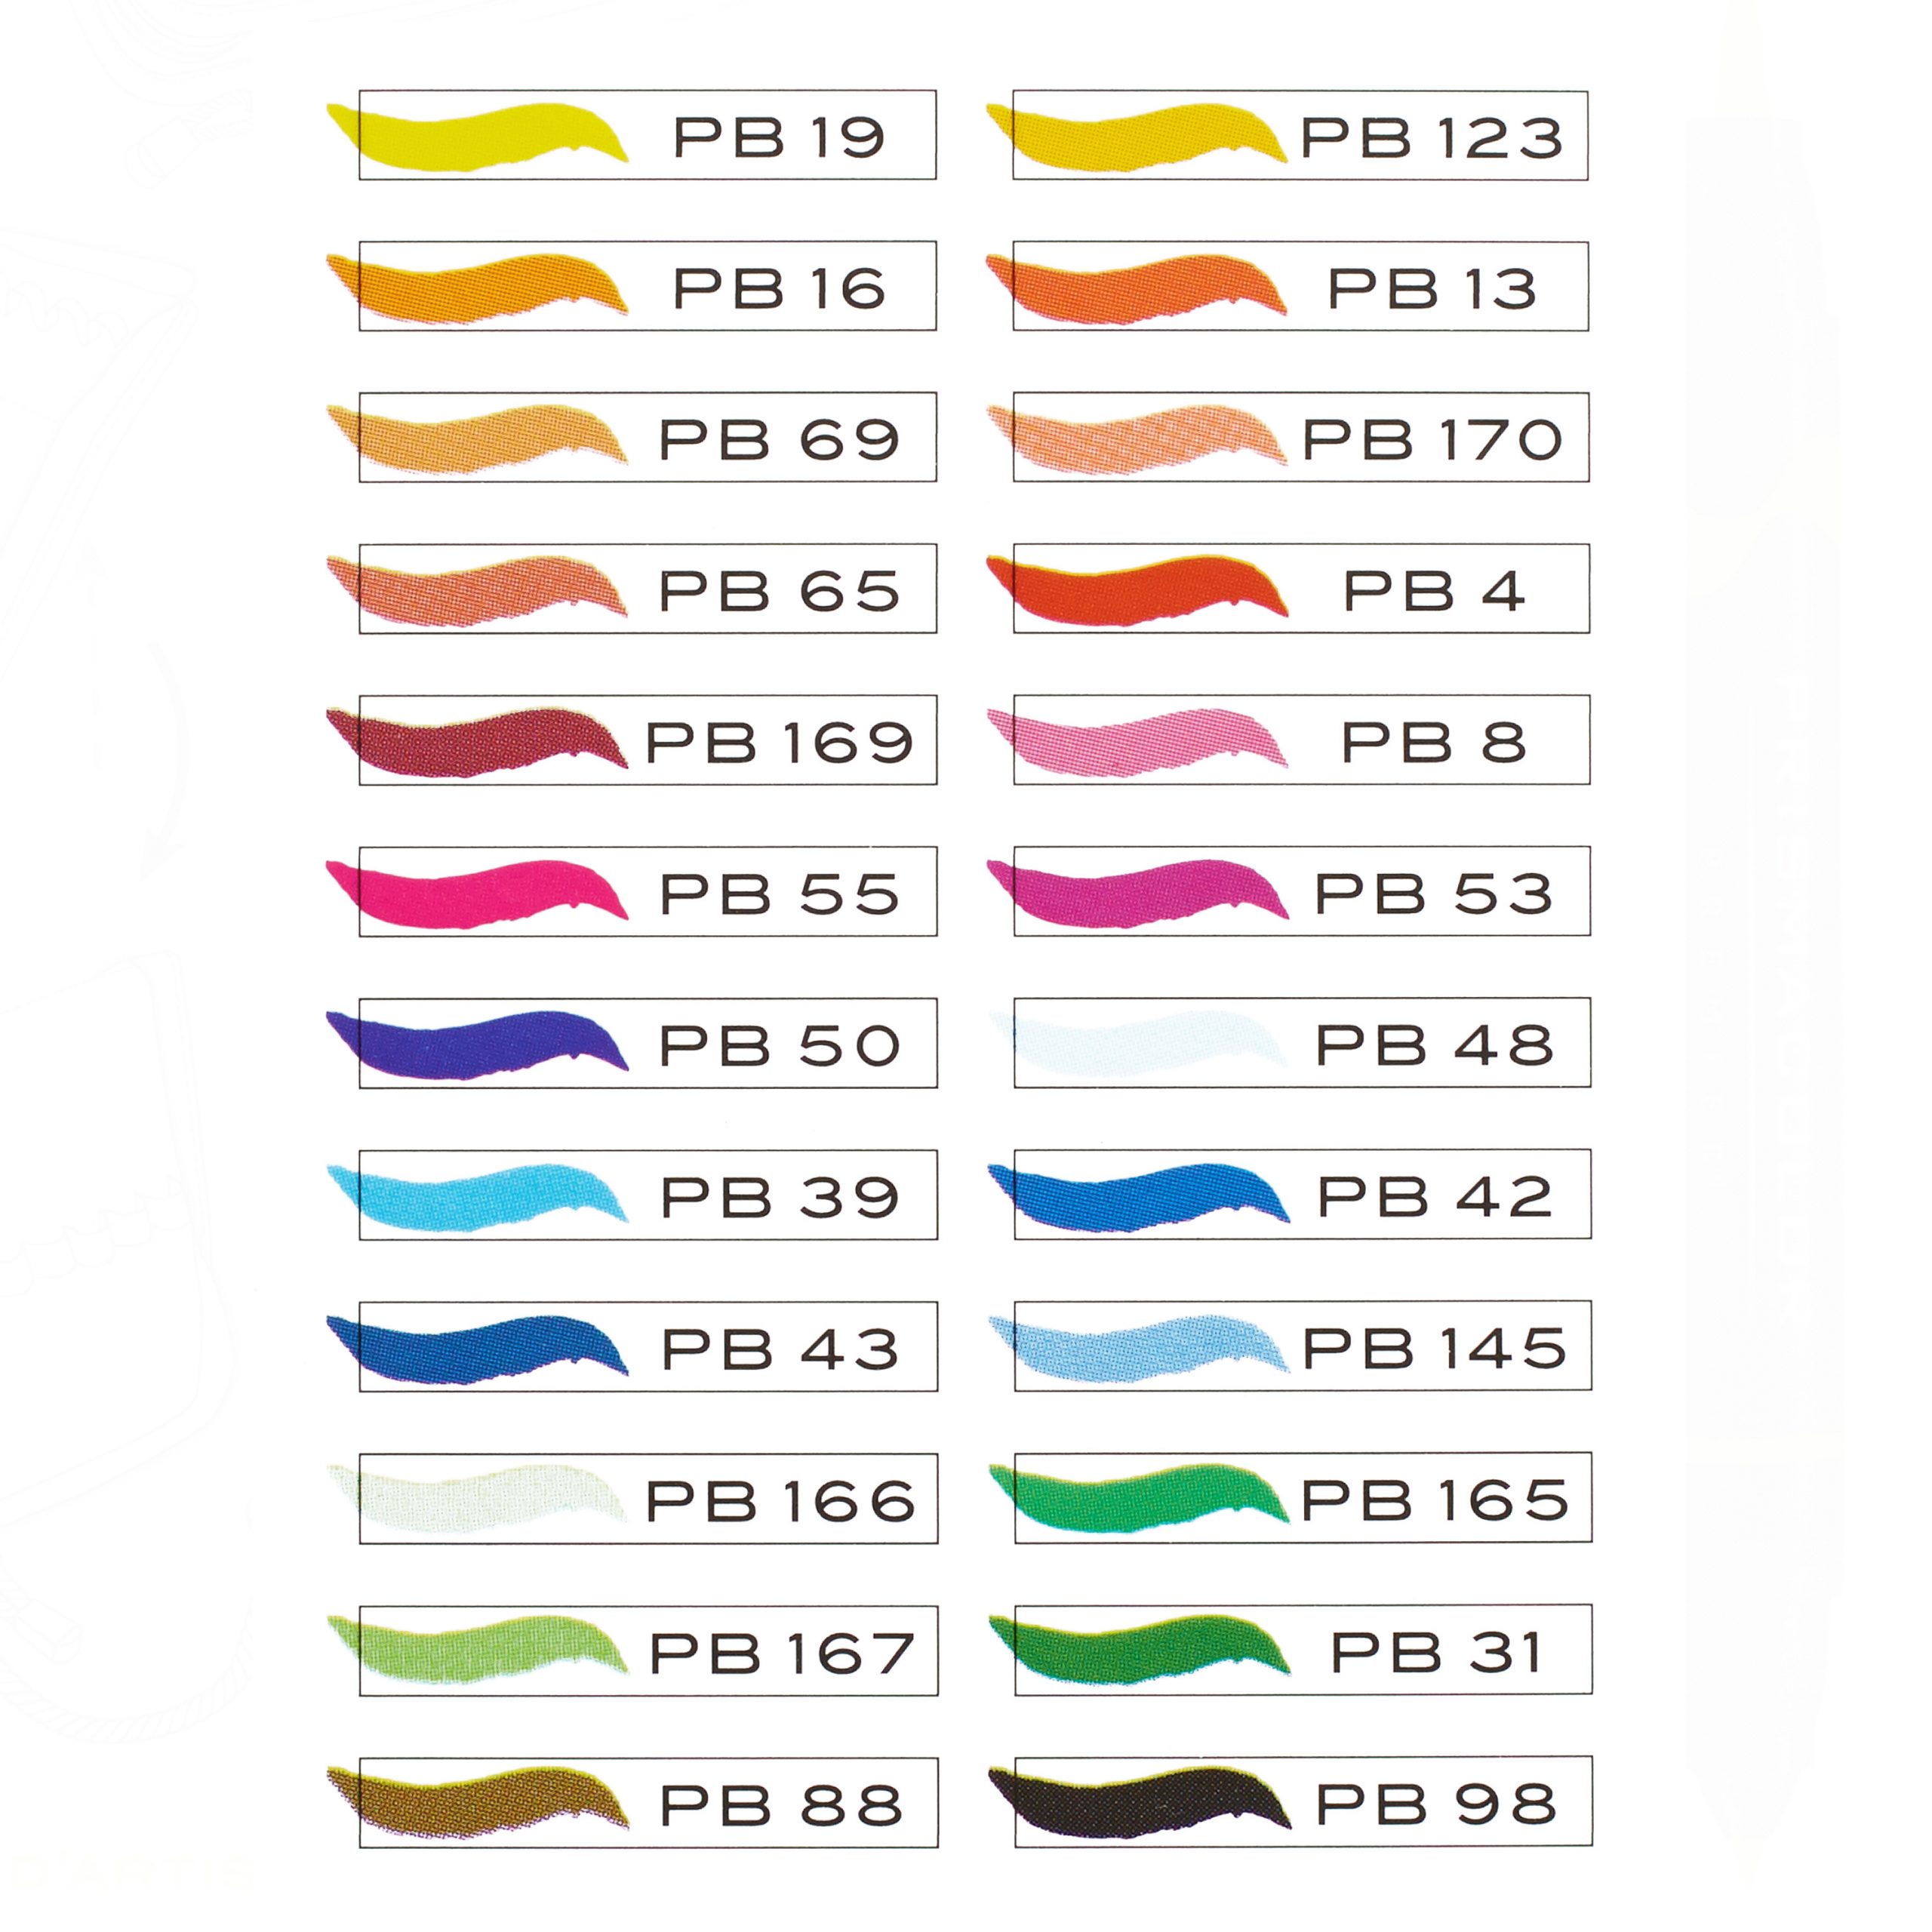 1776353-prismacolor-markers-premierbrush-package-colorkey